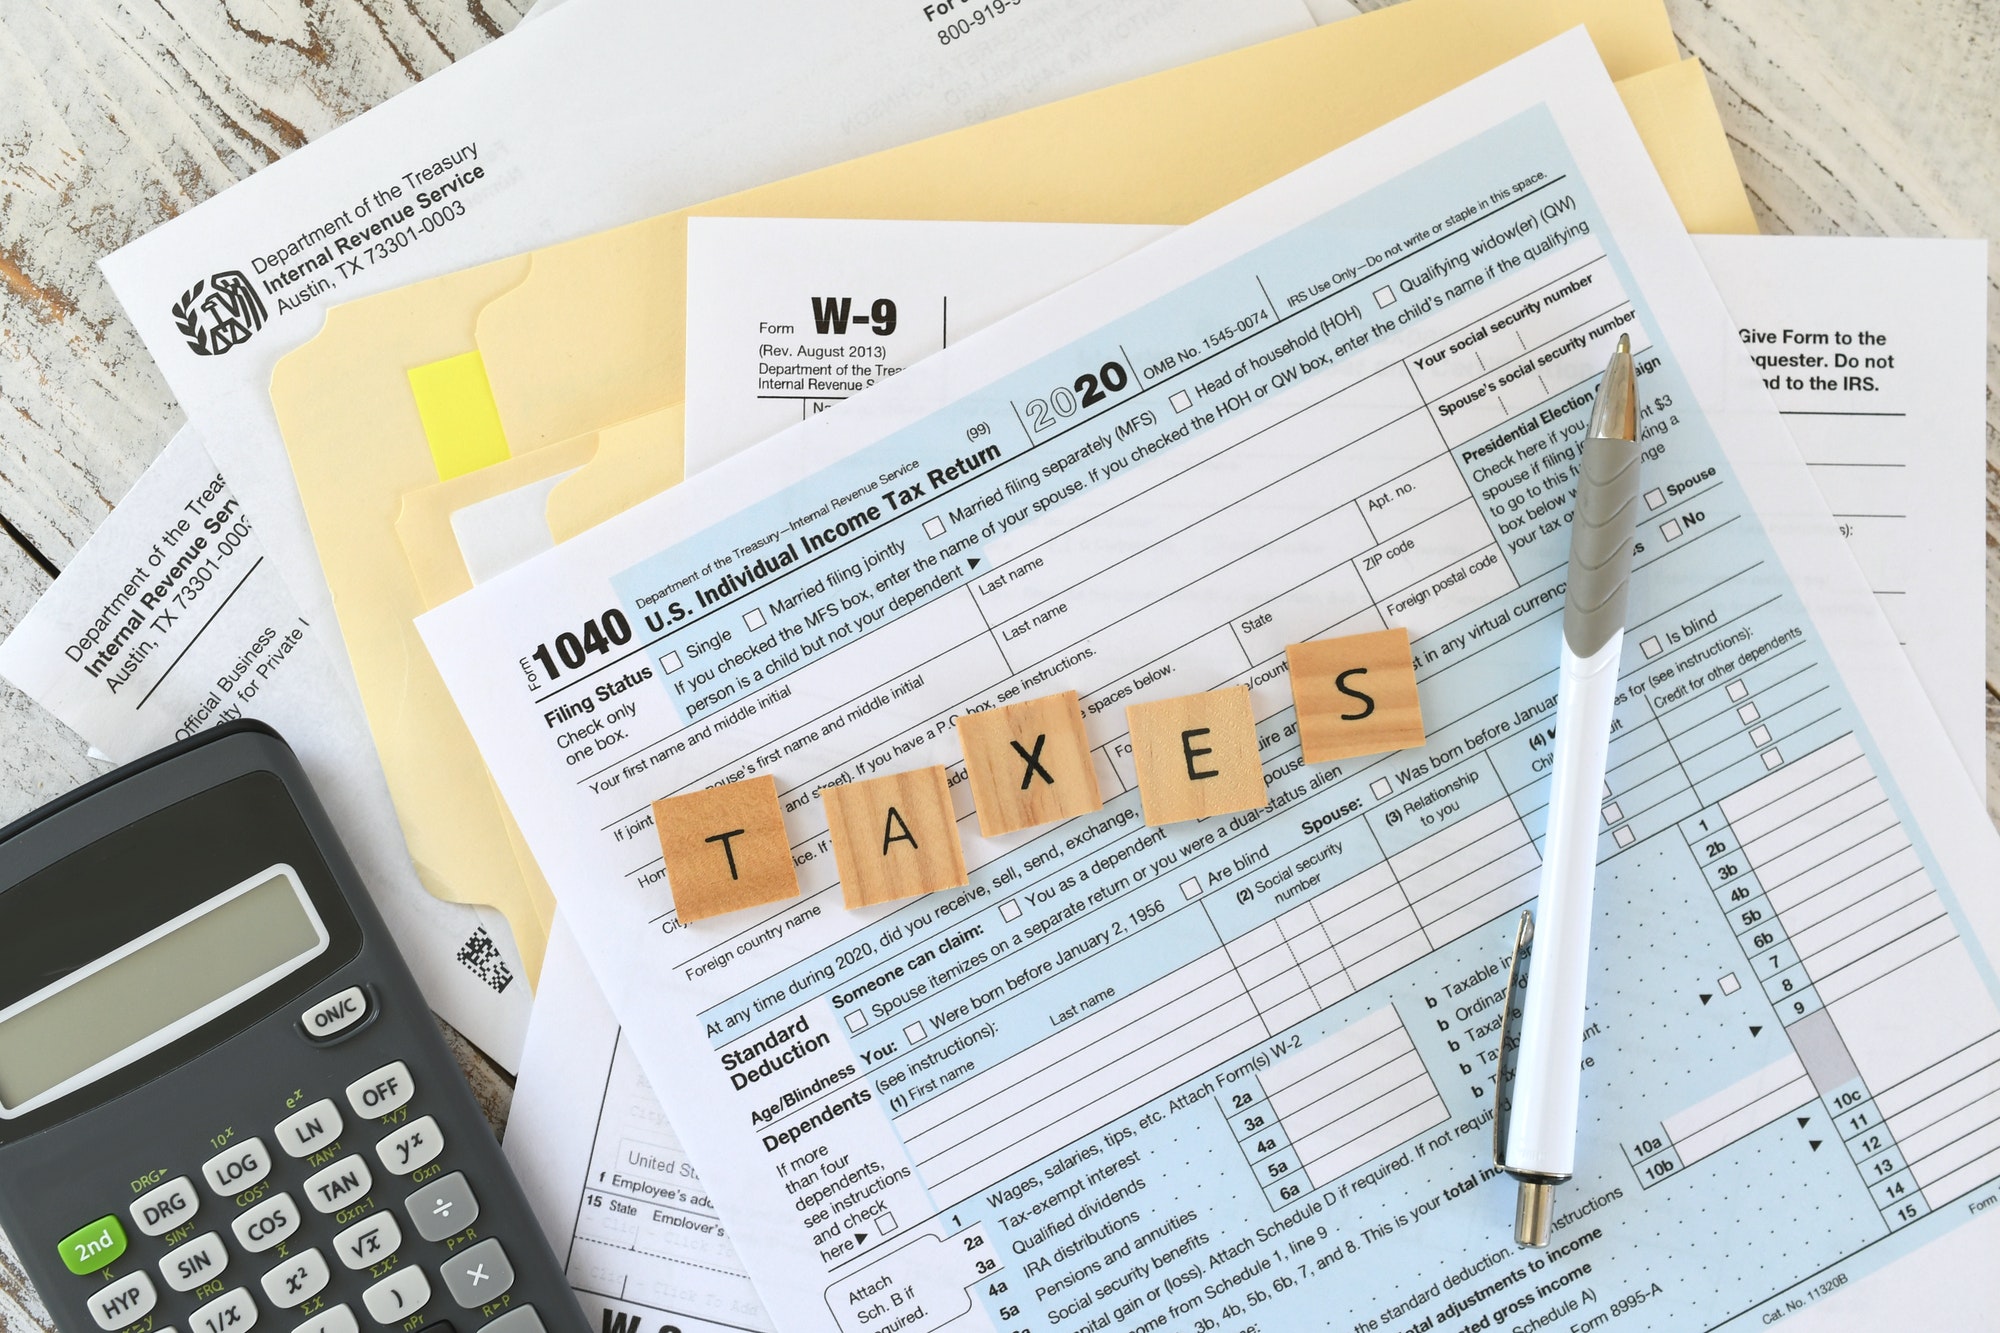 time-to-file-taxes-income-tax-forms-irs-filing-deadline-paperwork-april-15th-owe-refund.jpg